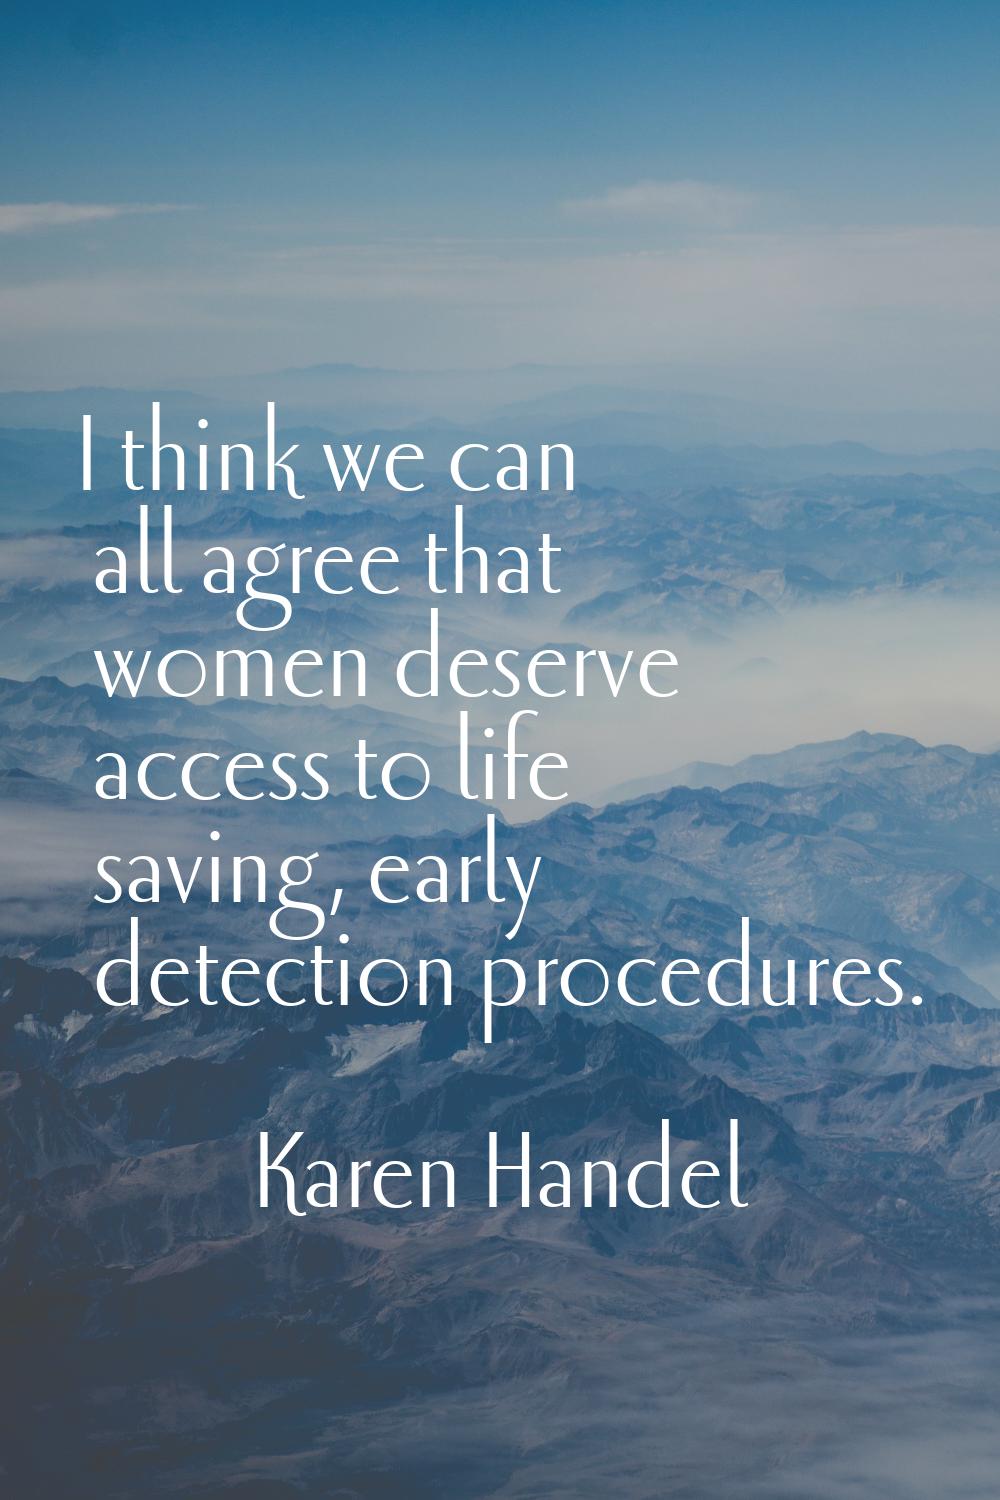 I think we can all agree that women deserve access to life saving, early detection procedures.